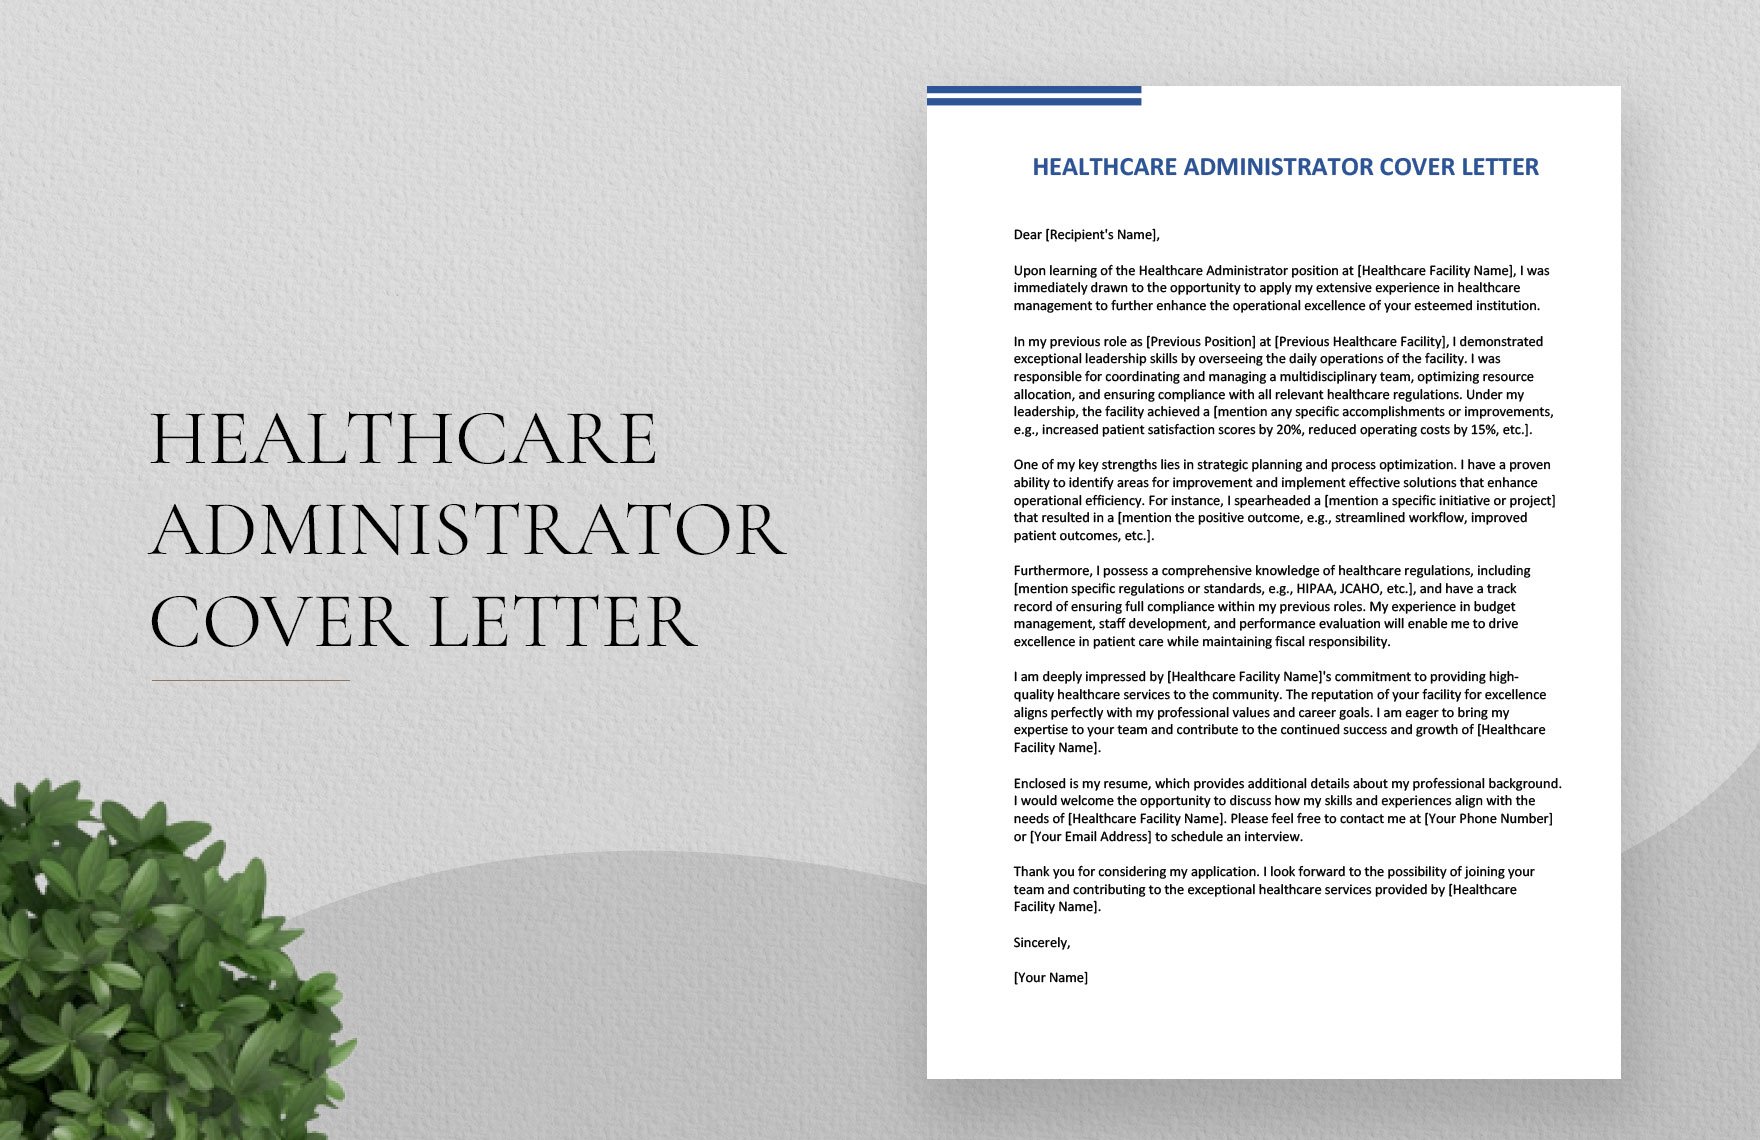 Healthcare Administrator Cover Letter